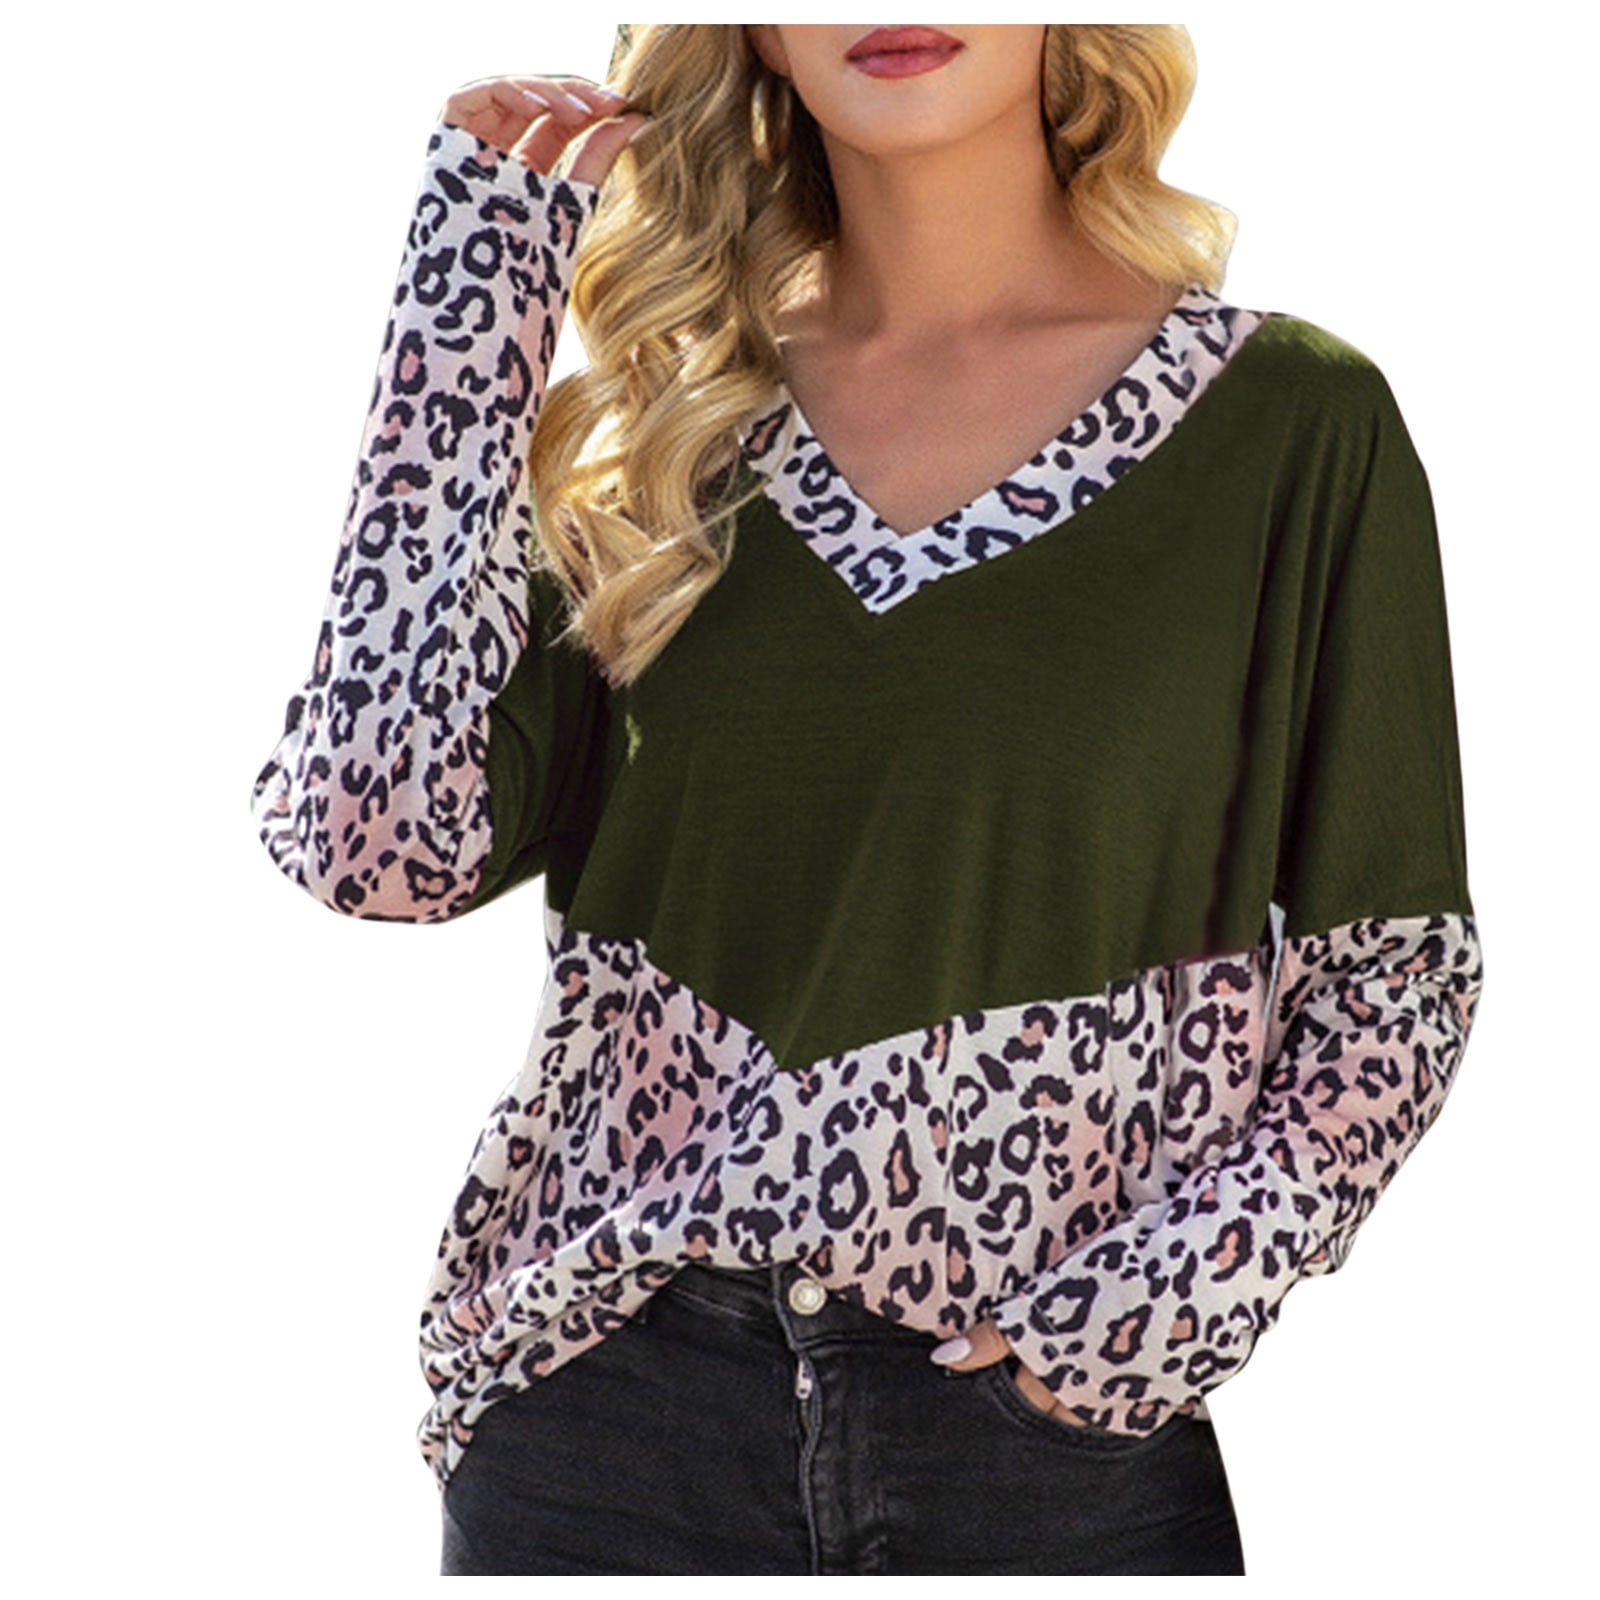 ❤️ Womens Leopard Print T Shirt Tops Casual Loose V Neck Short Sleeve Tee Blouse